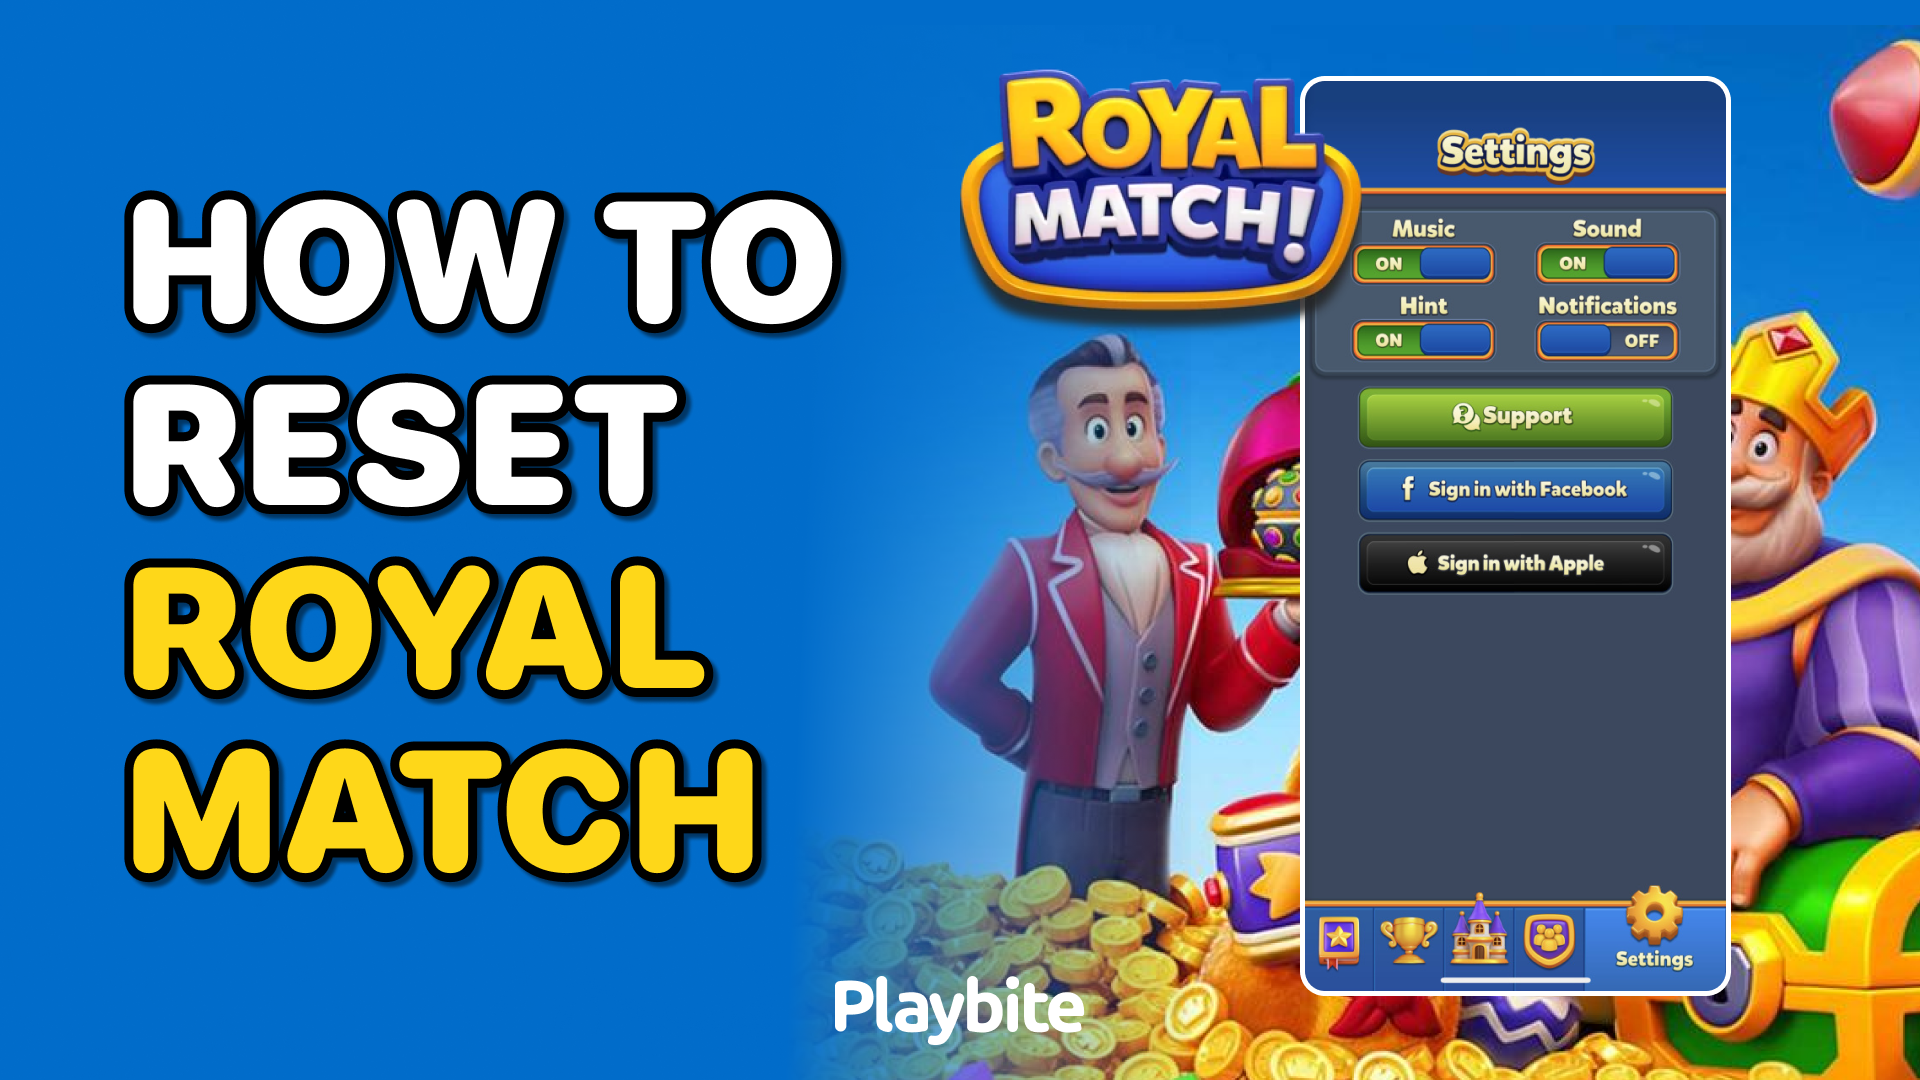 How To Reset Royal Match